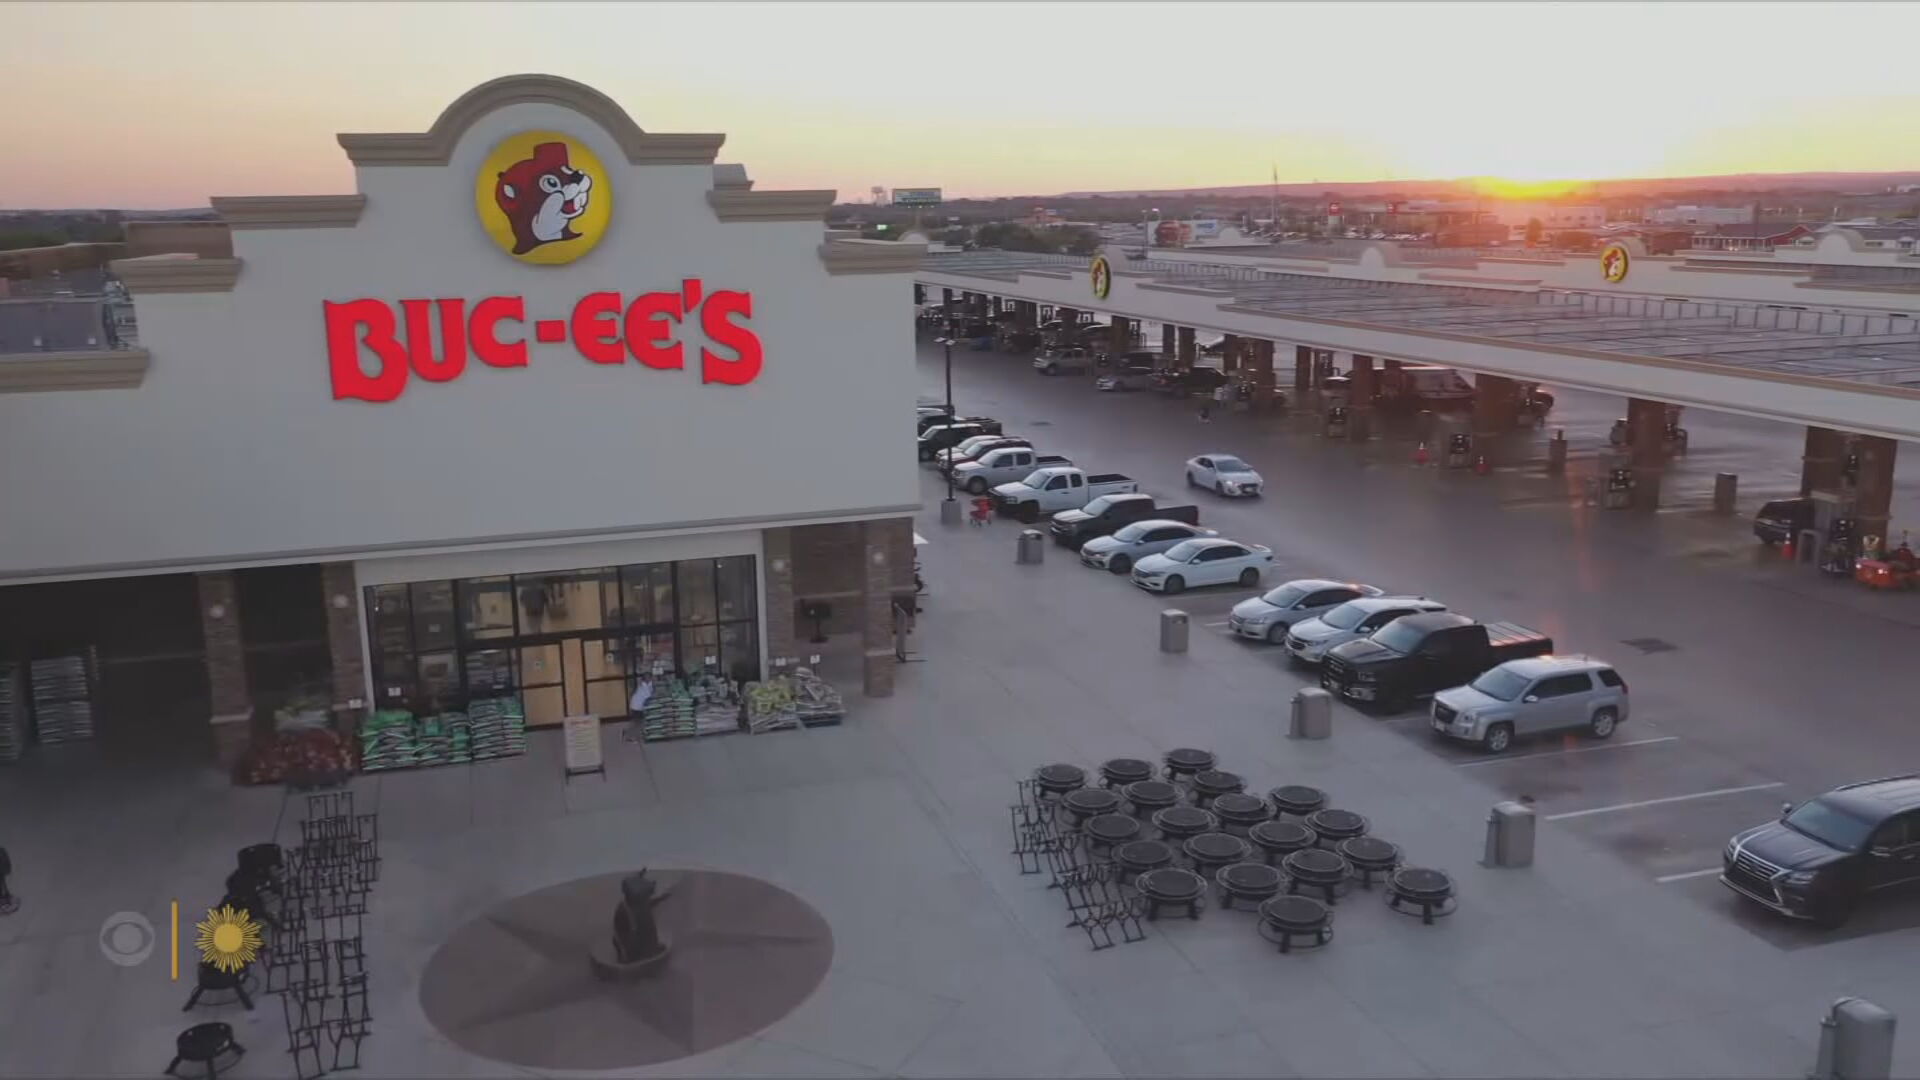 Massive Gas Station Chain 'Buc-ee's' Hopes To Compete With Iconic Johnson's  Corner - CBS Colorado